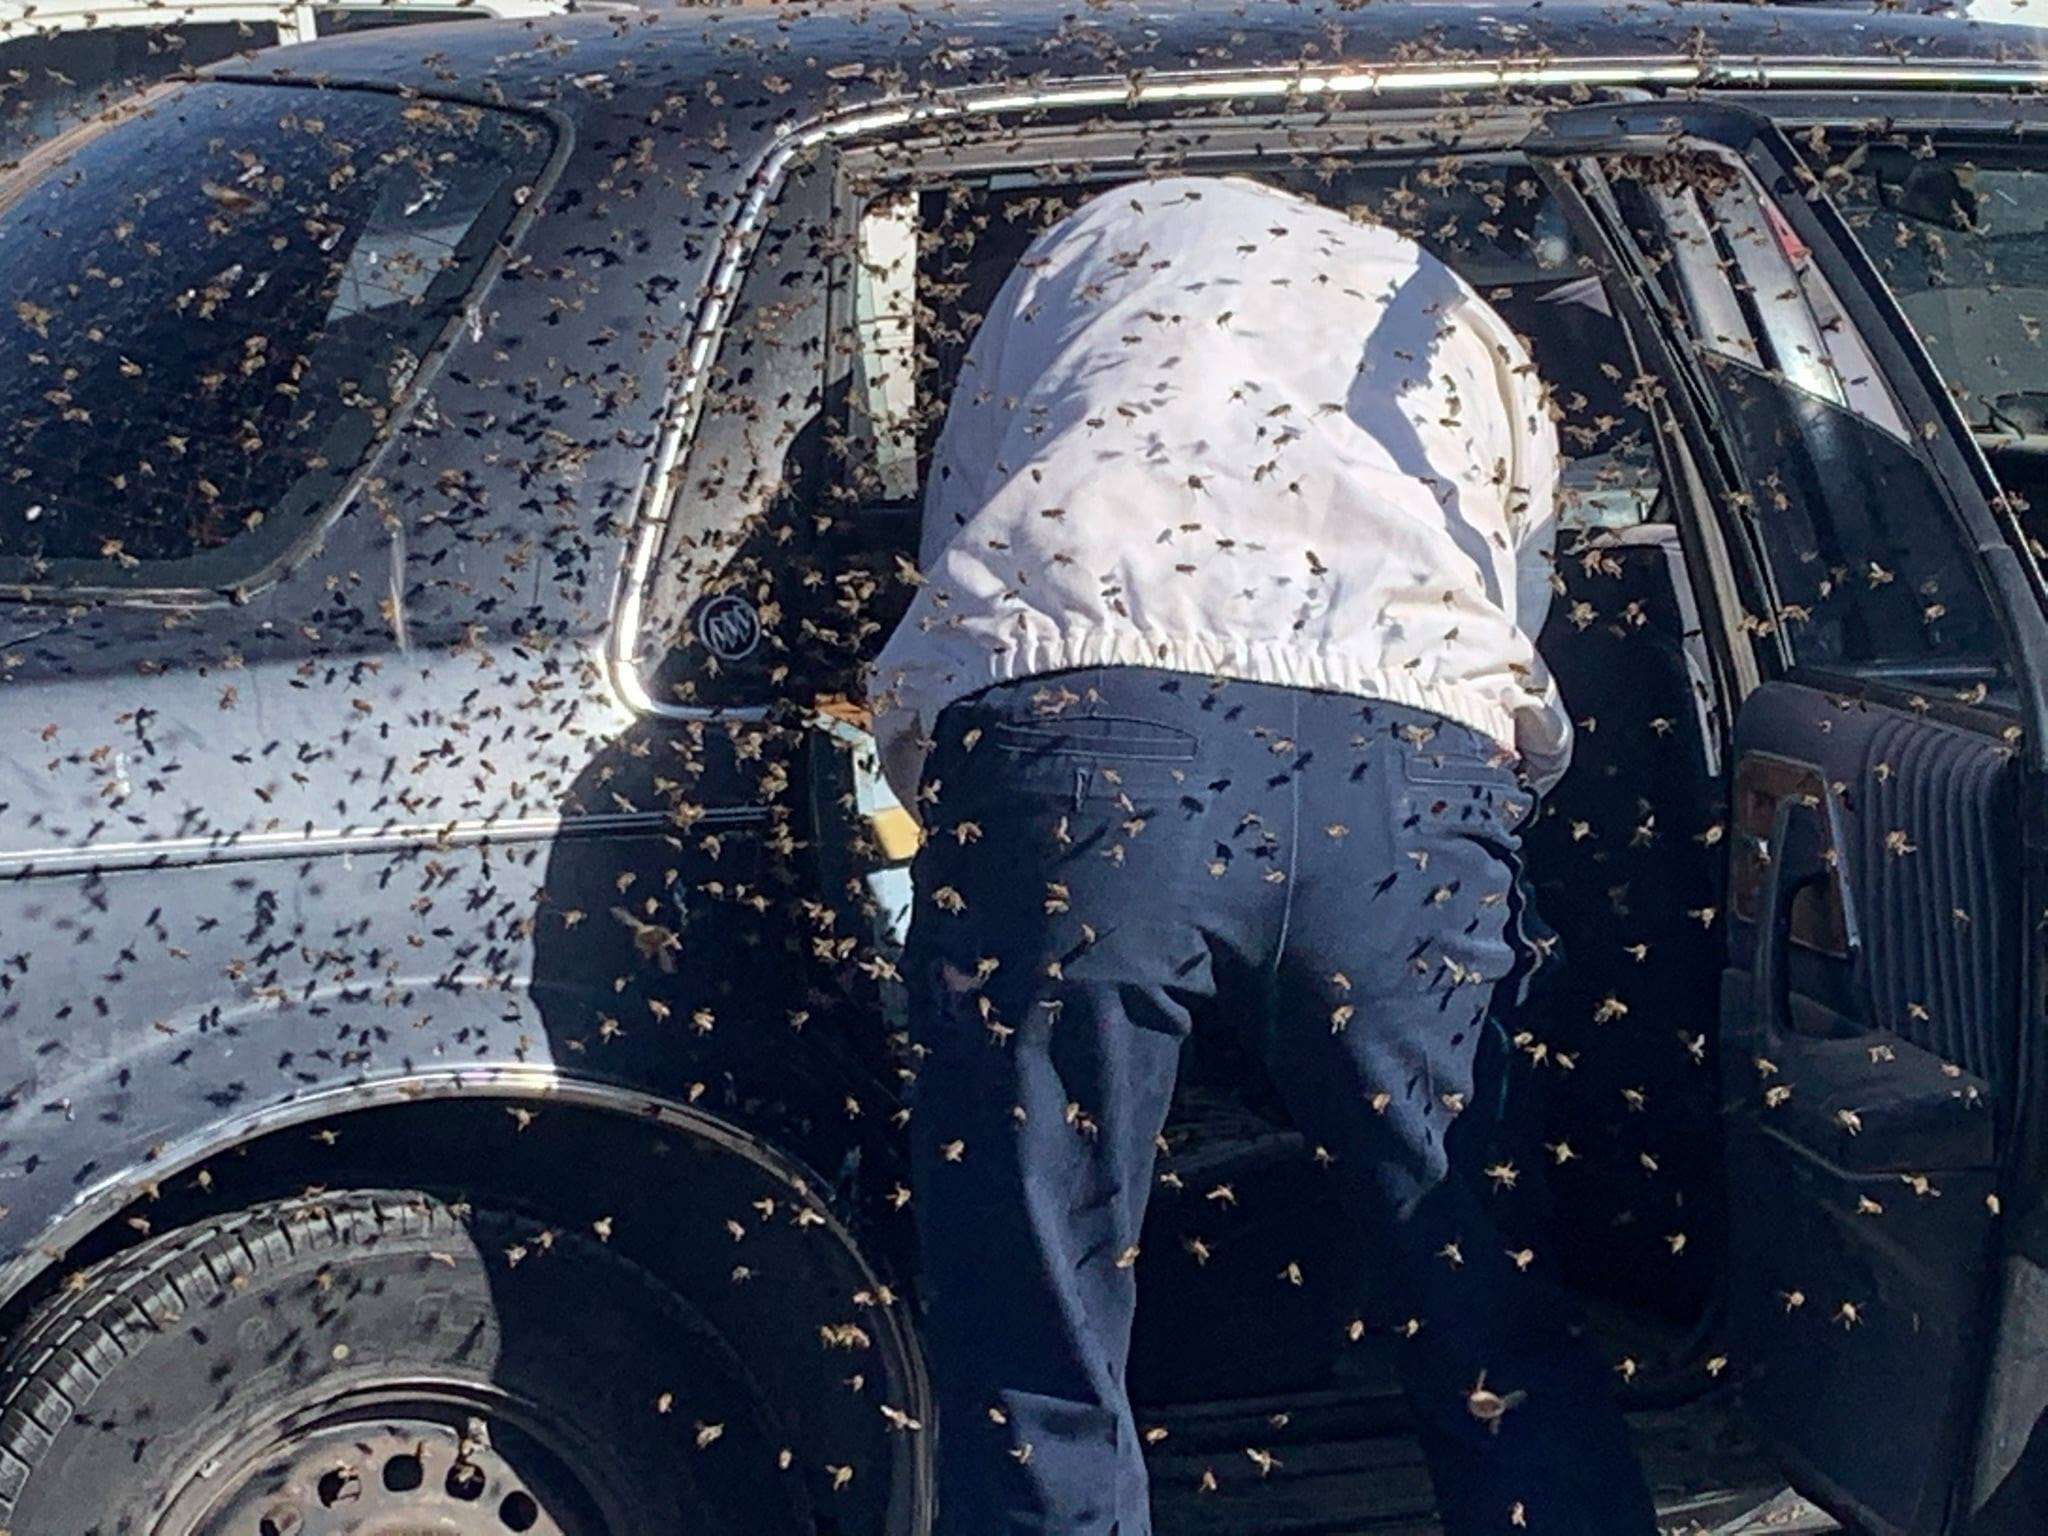 Man finds swarm of bees in his car